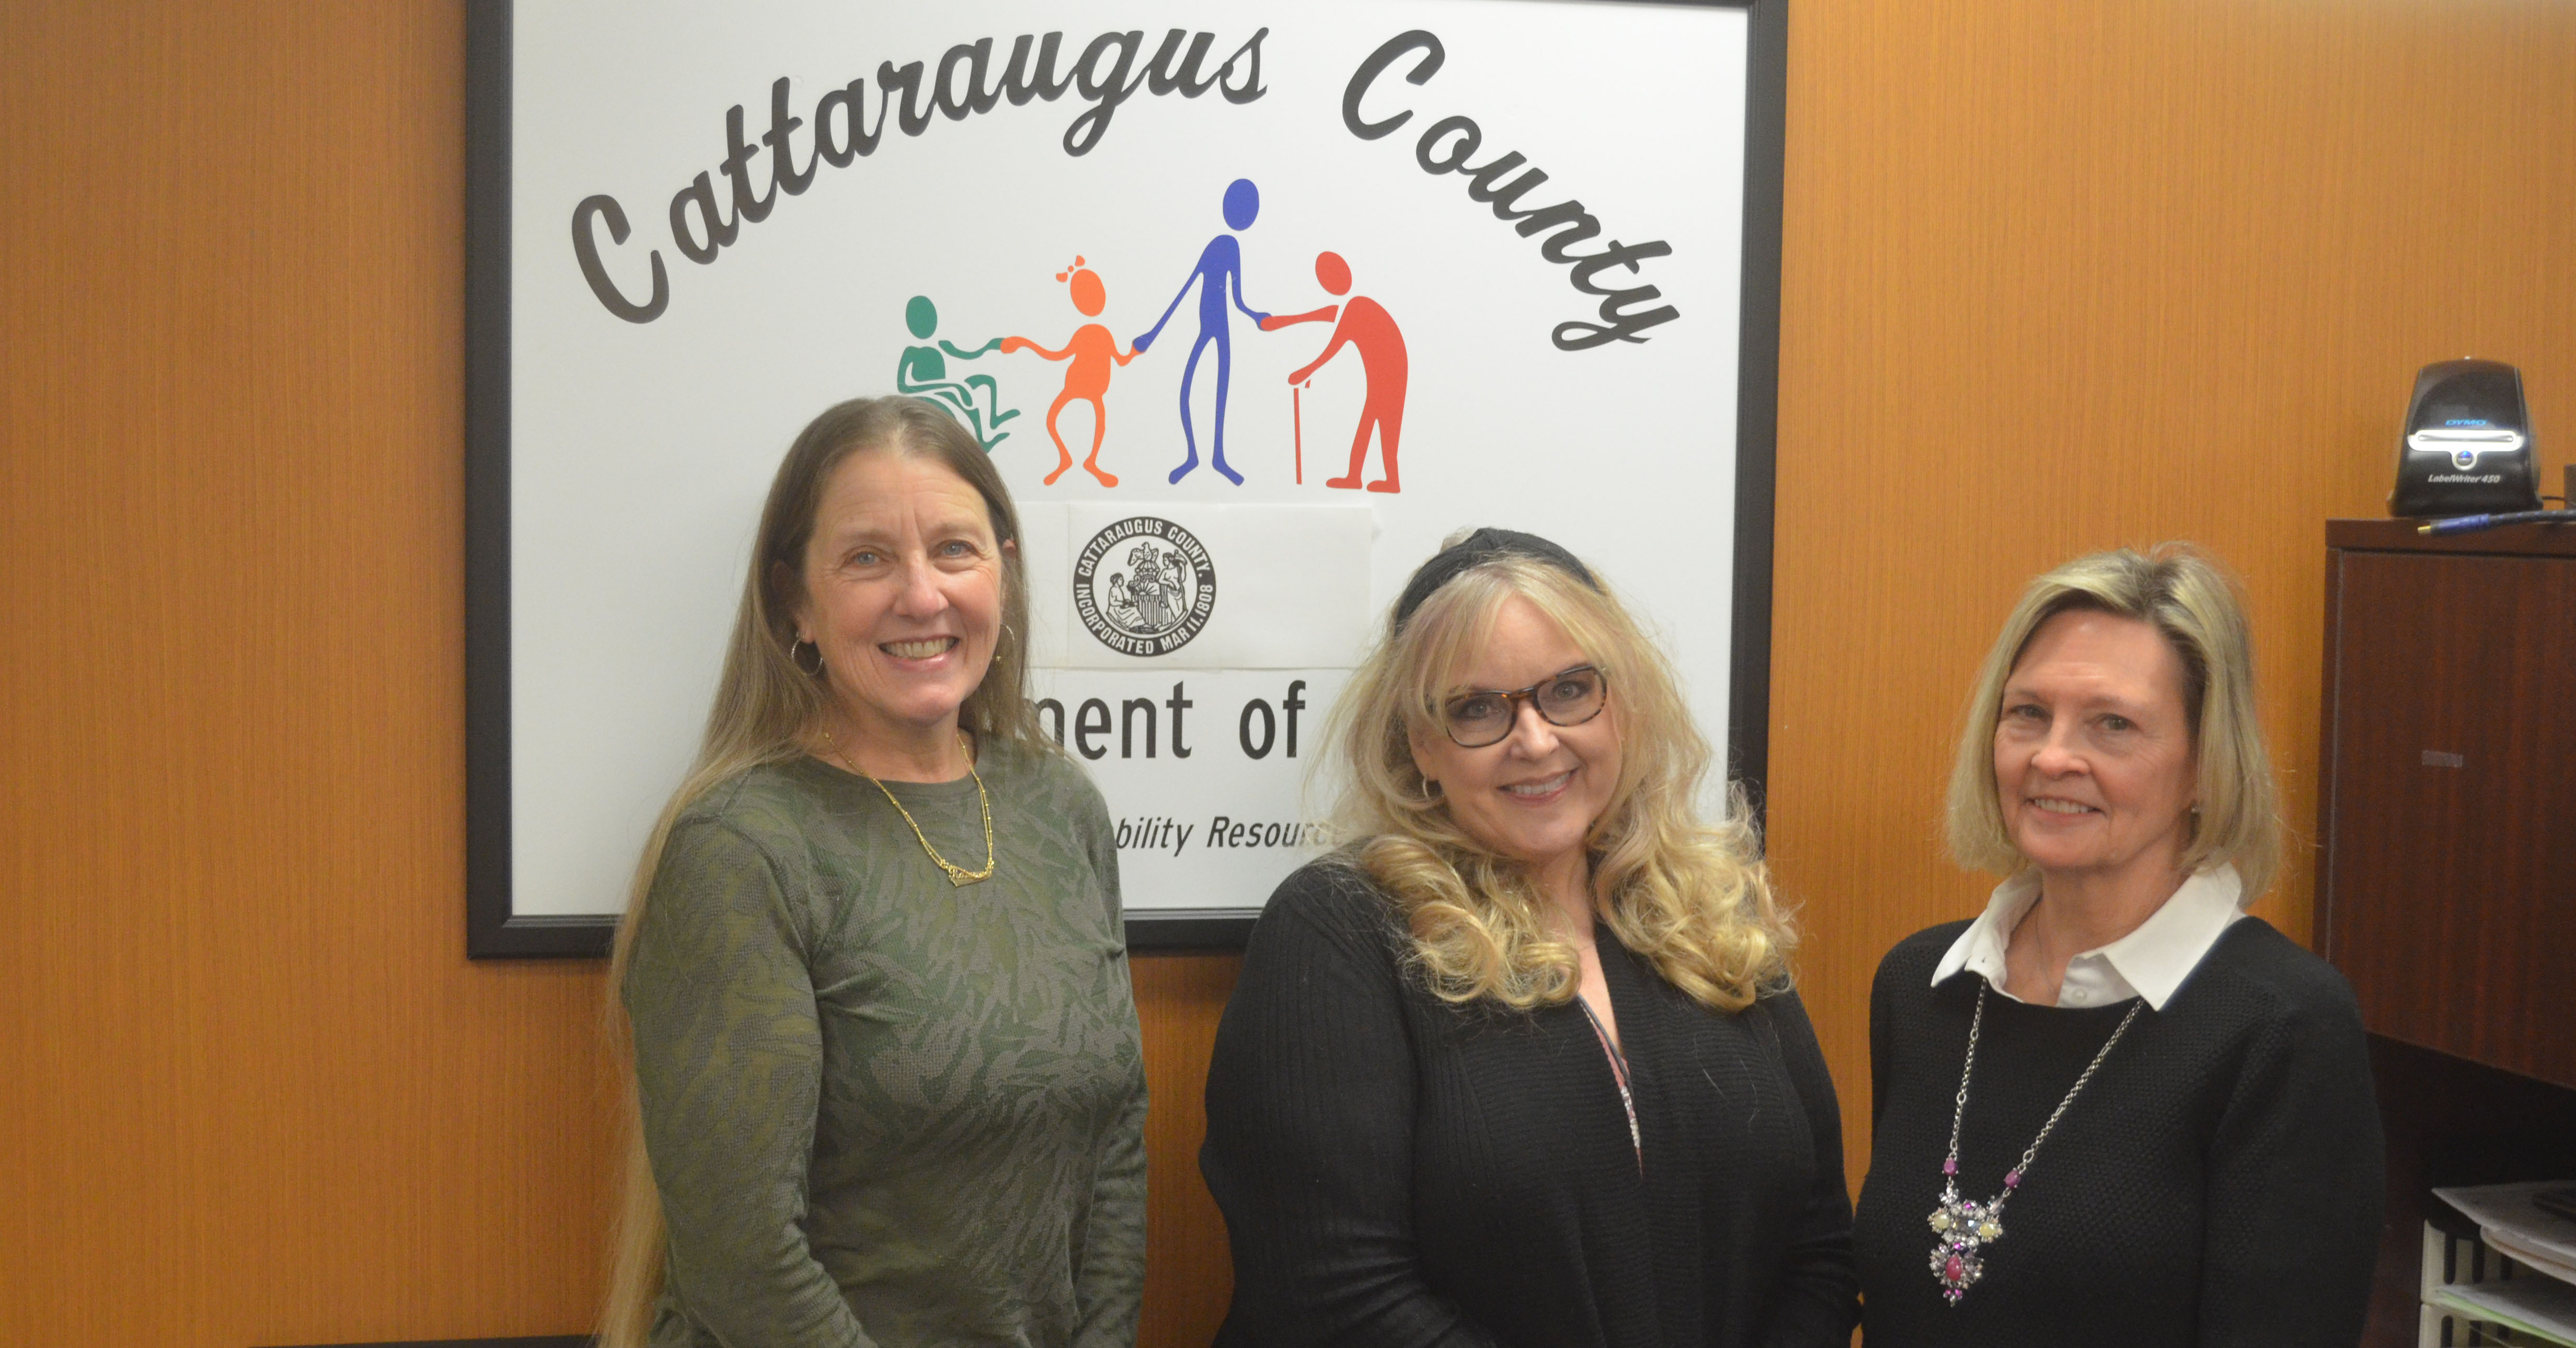 Former CDC directors Rosanne Larsen and Terri Stranburg (left and right) with Cathy Mackay, director of the Cattaraugus County Department for the Aging (middle).